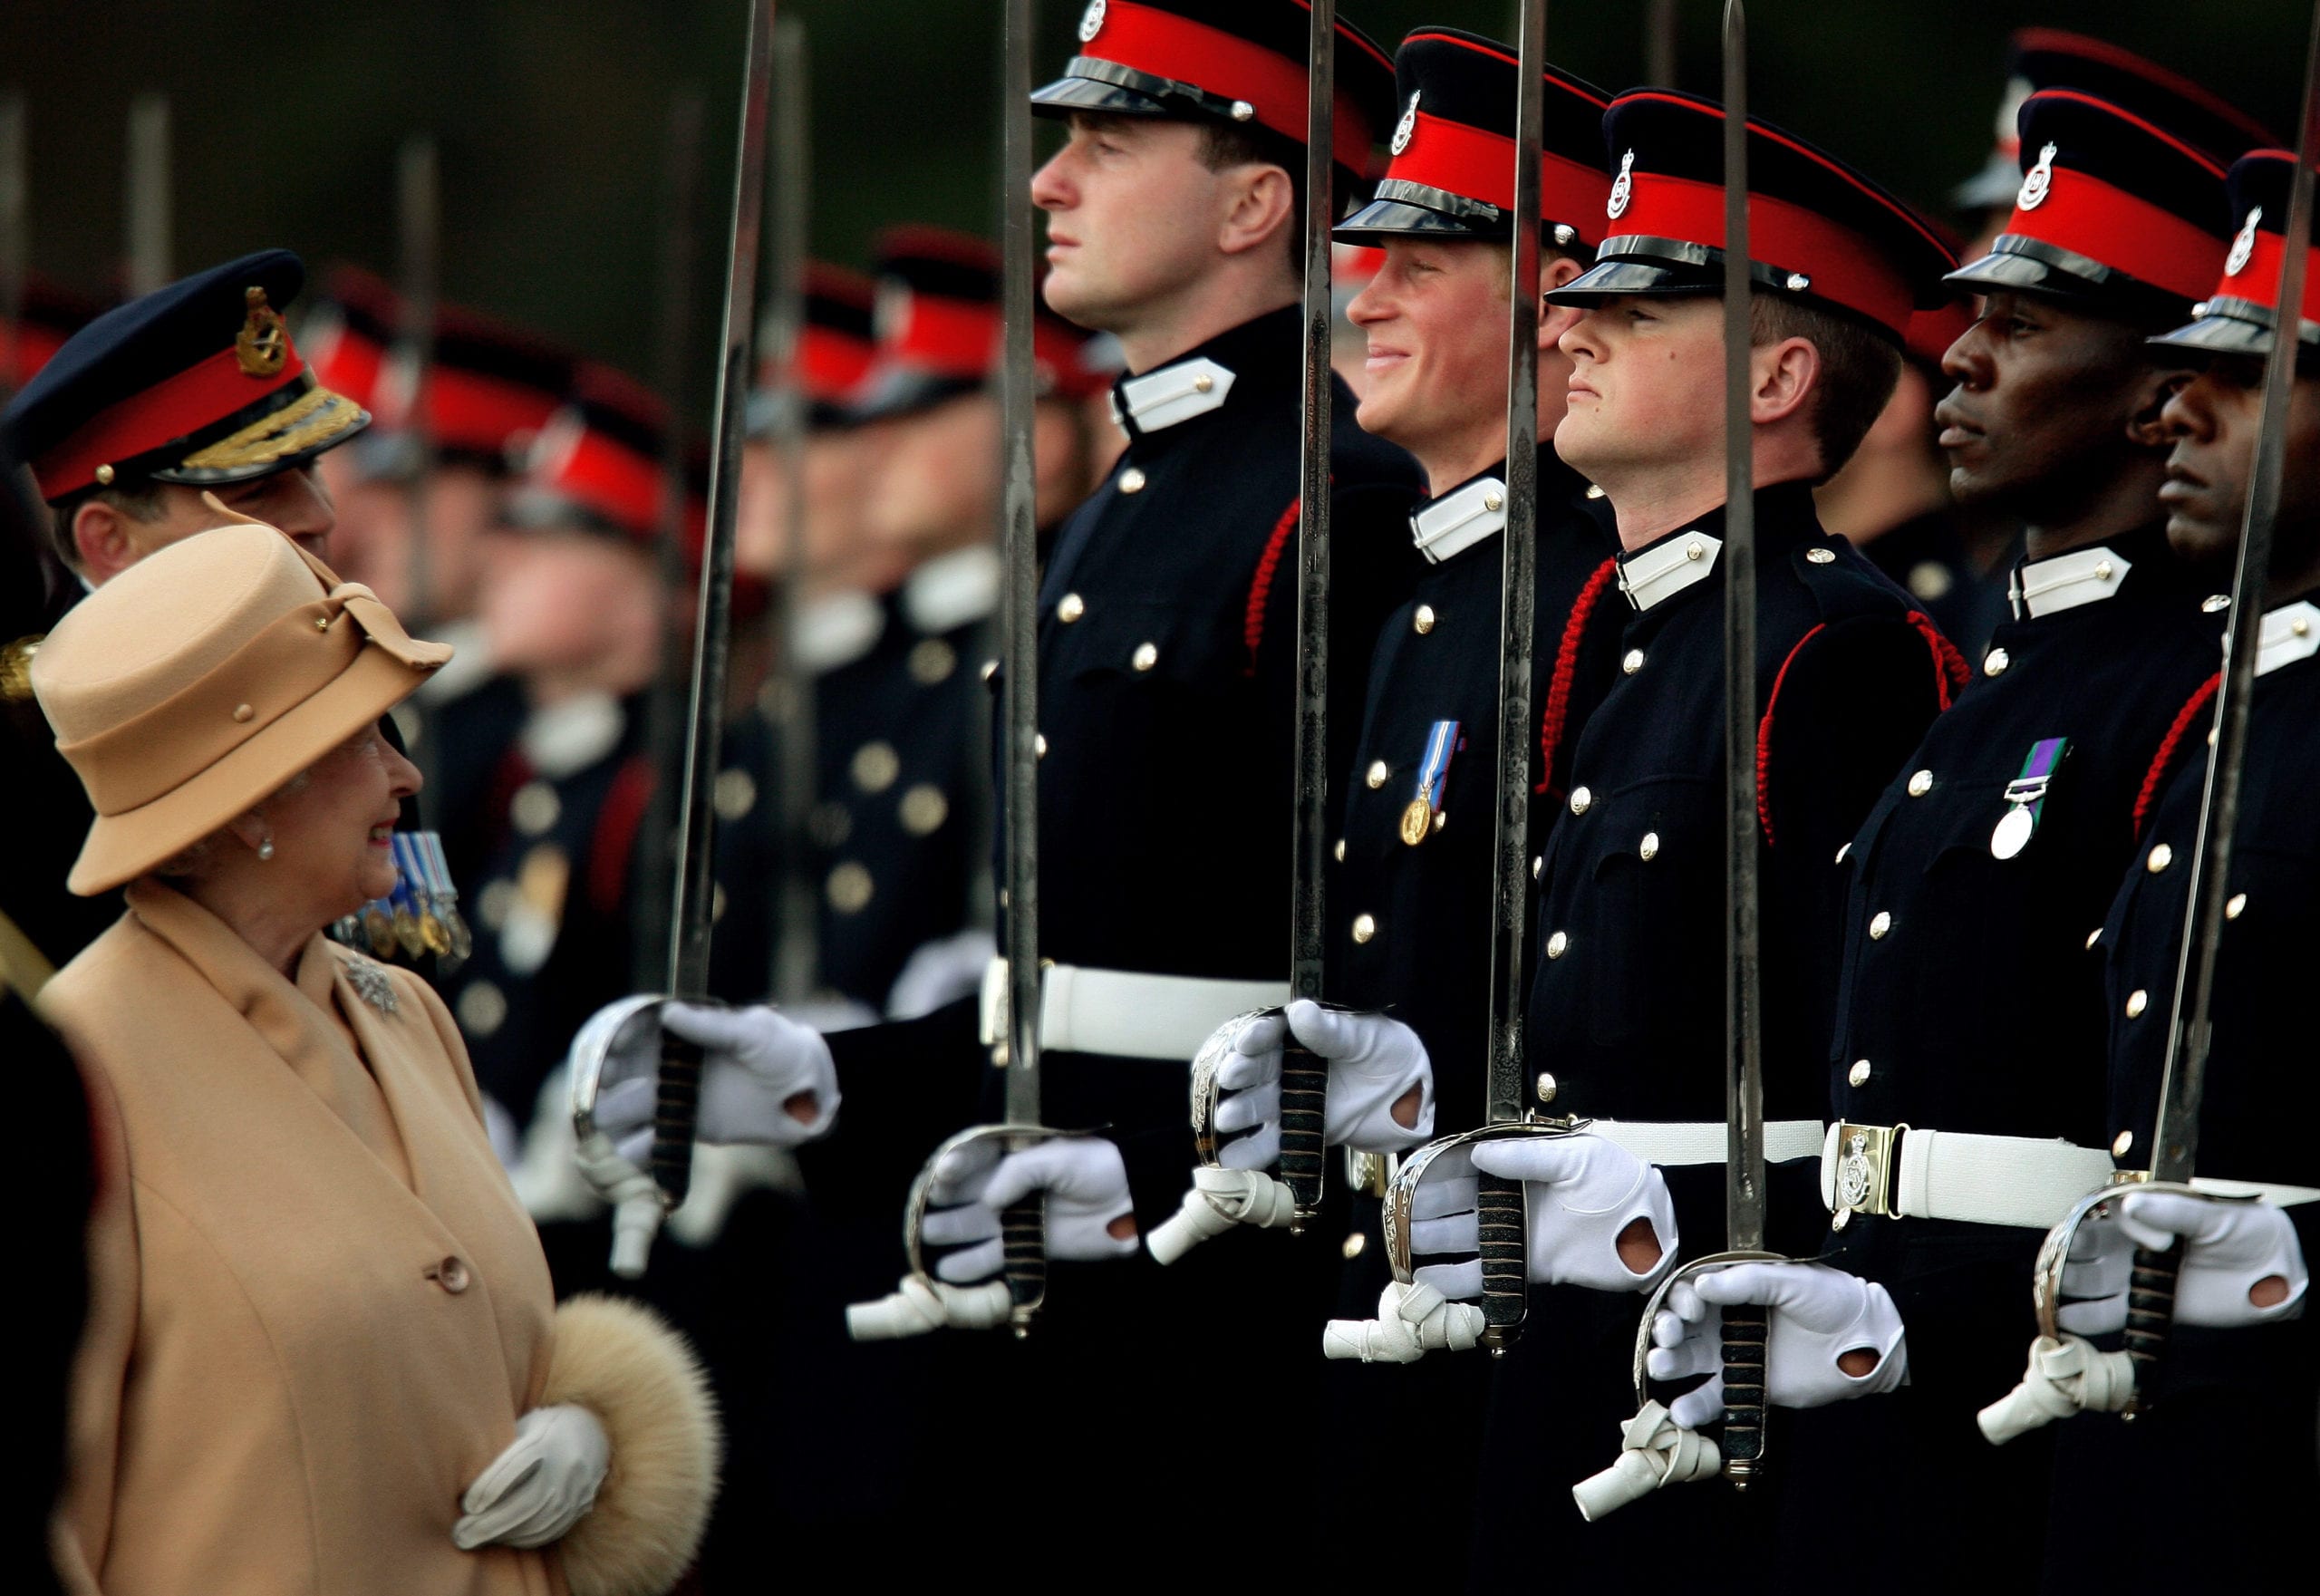 Britain's Queen Elizabeth smiles with Prince Harry during the Sovereign's Parade at the Royal Military Academy in Sandhurst, southern England April 12, 2006. Harry, once dubbed a royal wild child for underage drink and drug antics, graduated as an army officer on Wednesday before joining a regiment that could be sent to Iraq or Afghanistan.   REUTERS/Dylan Martinez - GM1DSJGYFPAA